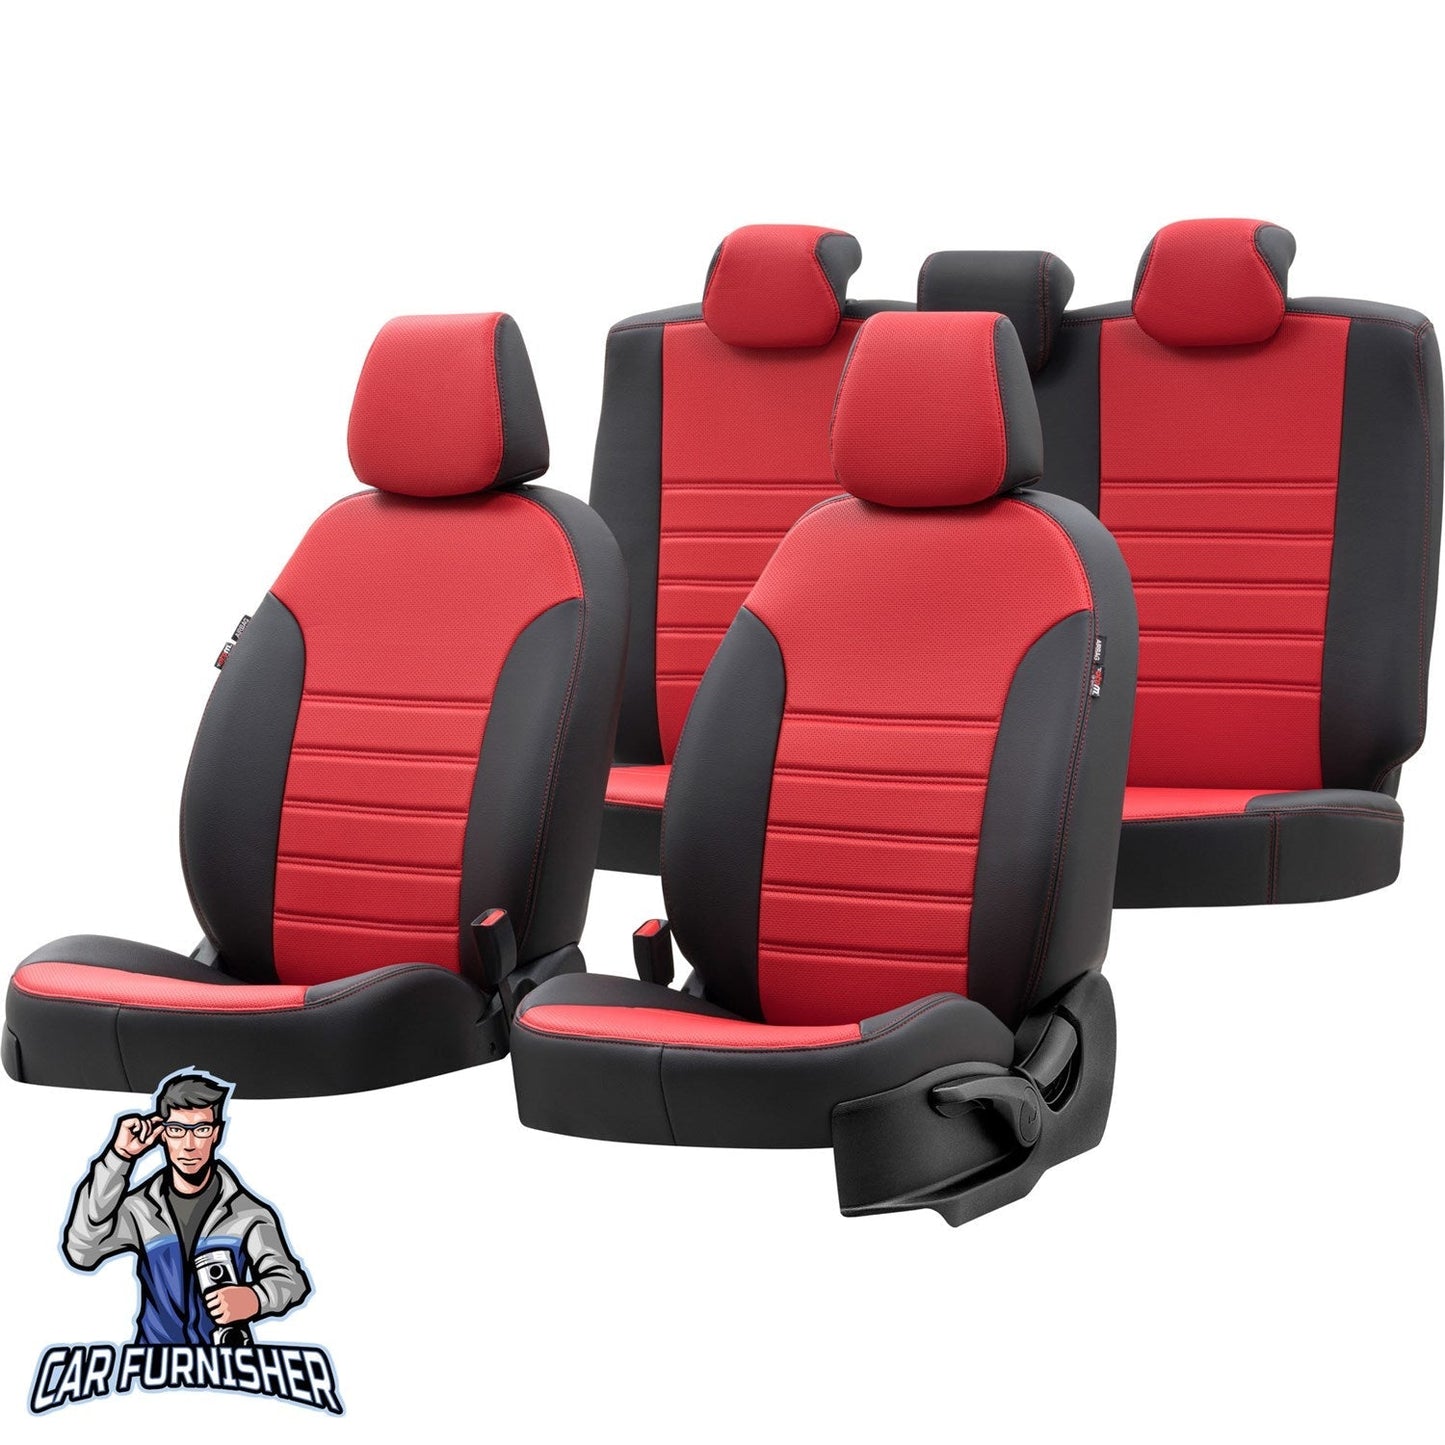 Seat Alhambra Seat Covers New York Leather Design Red Leather